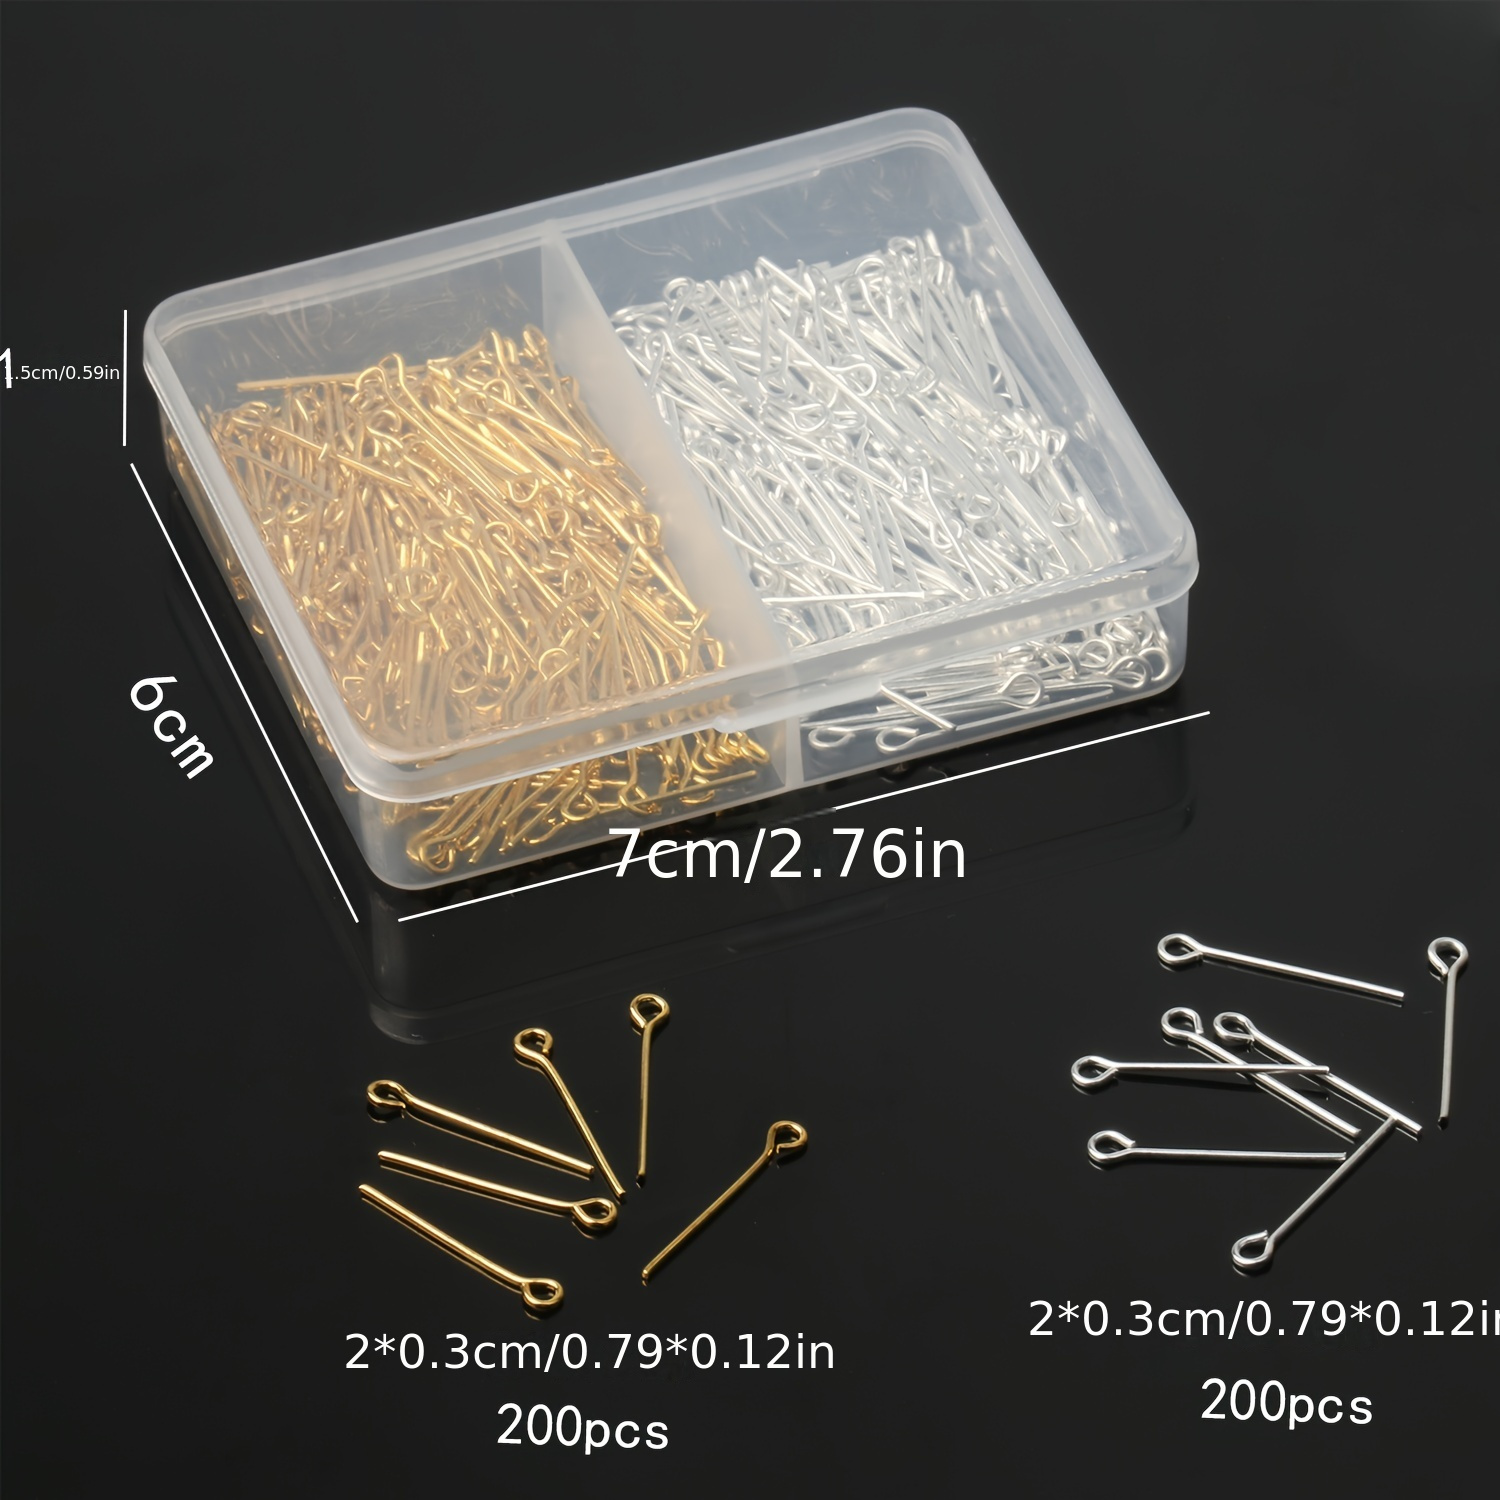 200pcs Flat Head Pins for DIY Jewelry Making Necklace Earrings